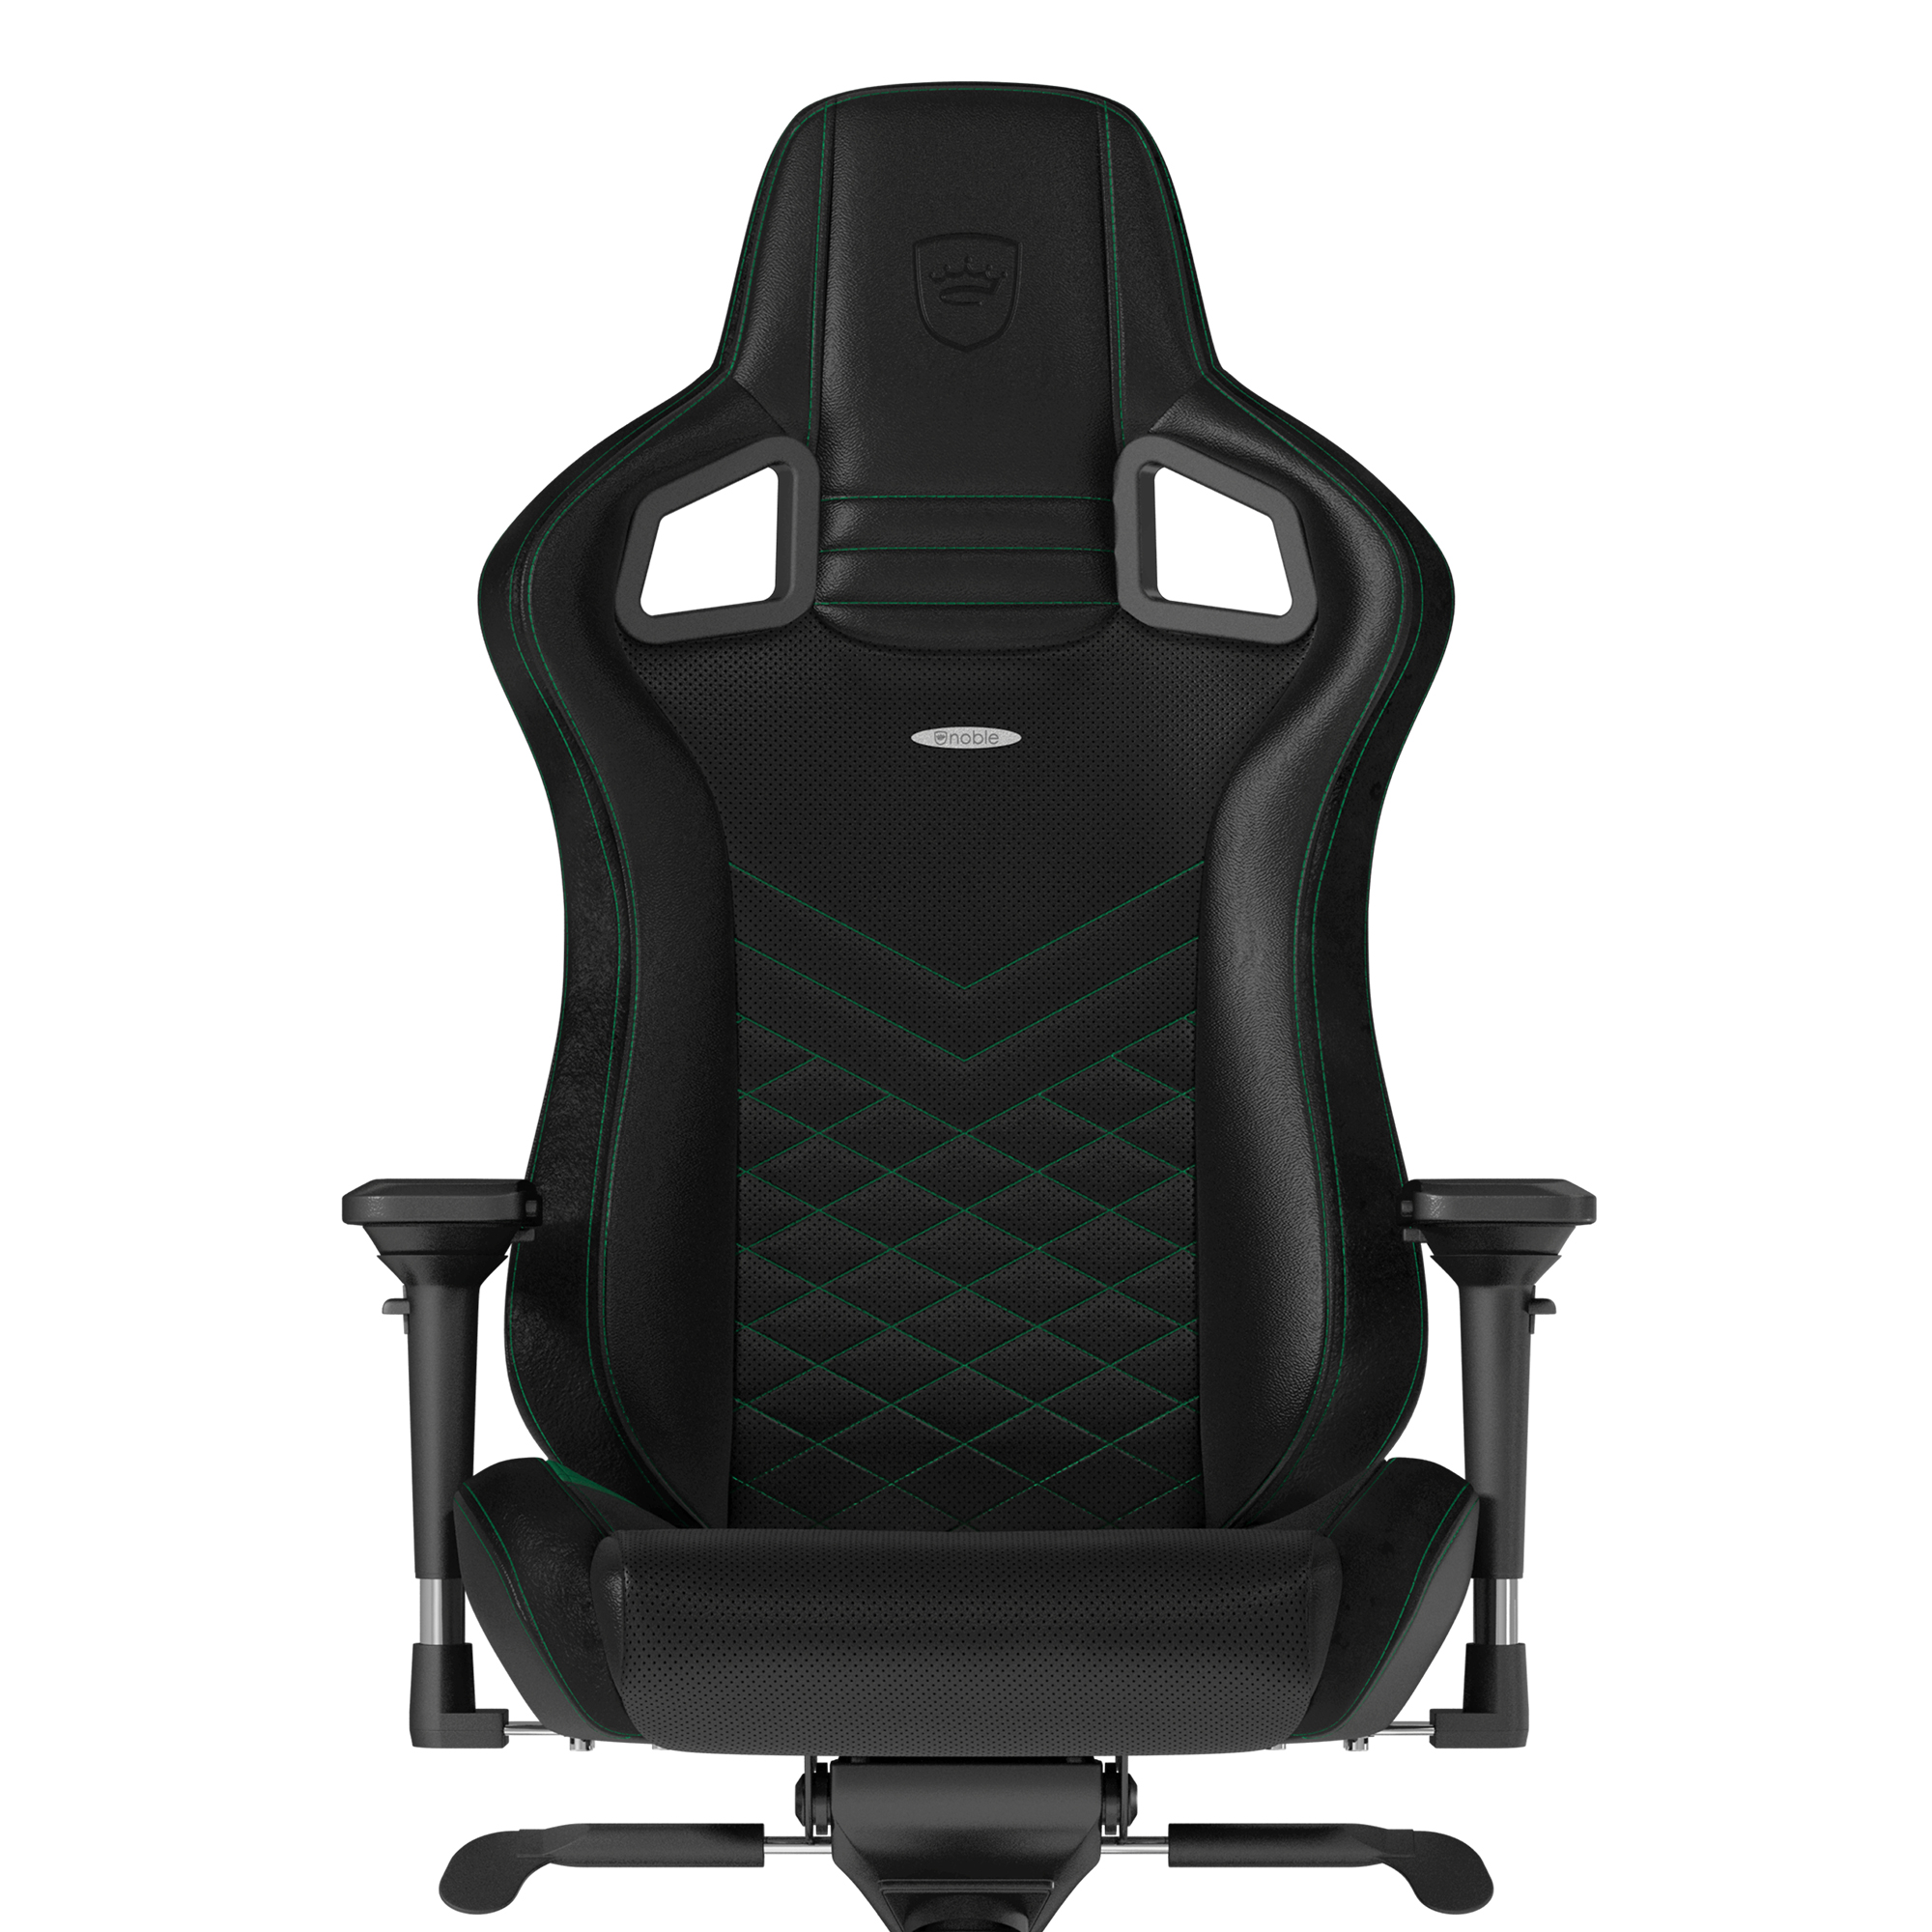 noblechairs - noblechairs EPIC Gaming Chair - Black/Green